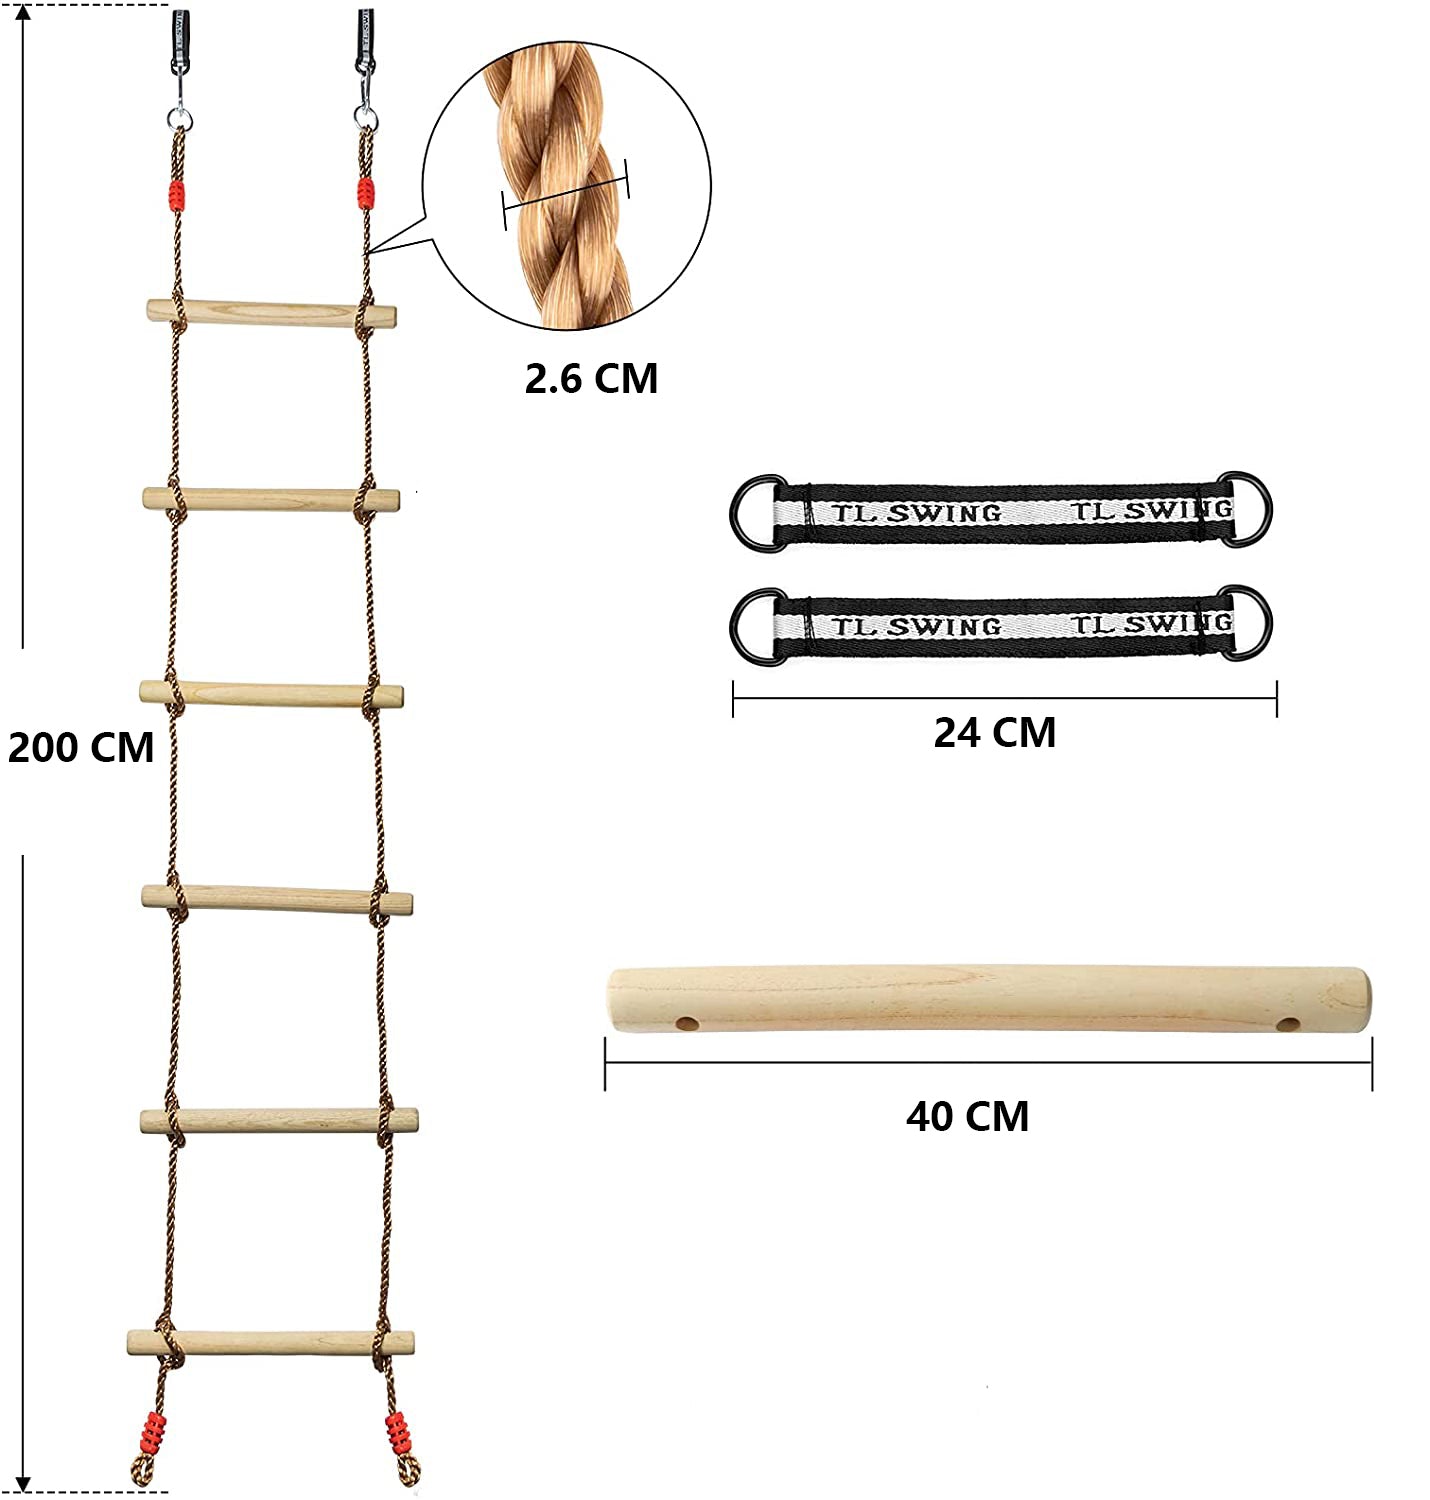 DS BS 6-Section Climbing Rope Ladder for Kids 200 cm – TSB Living